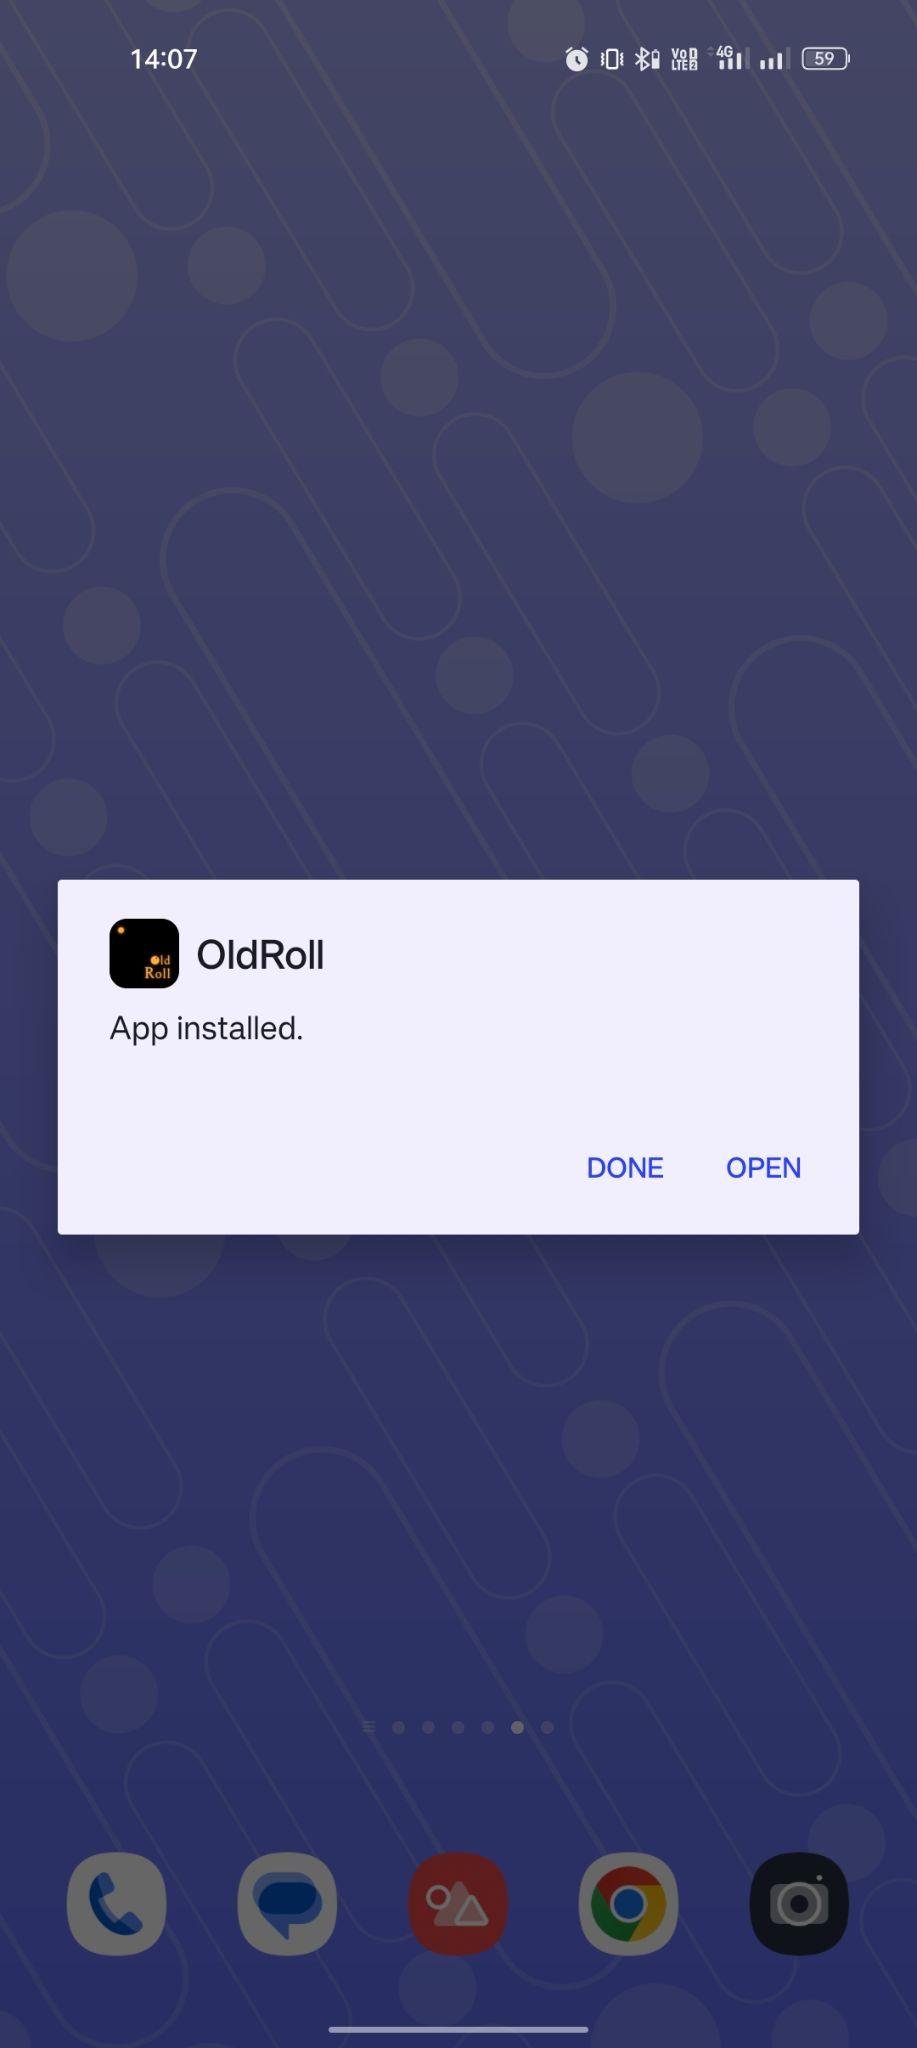 Old Roll apk installed